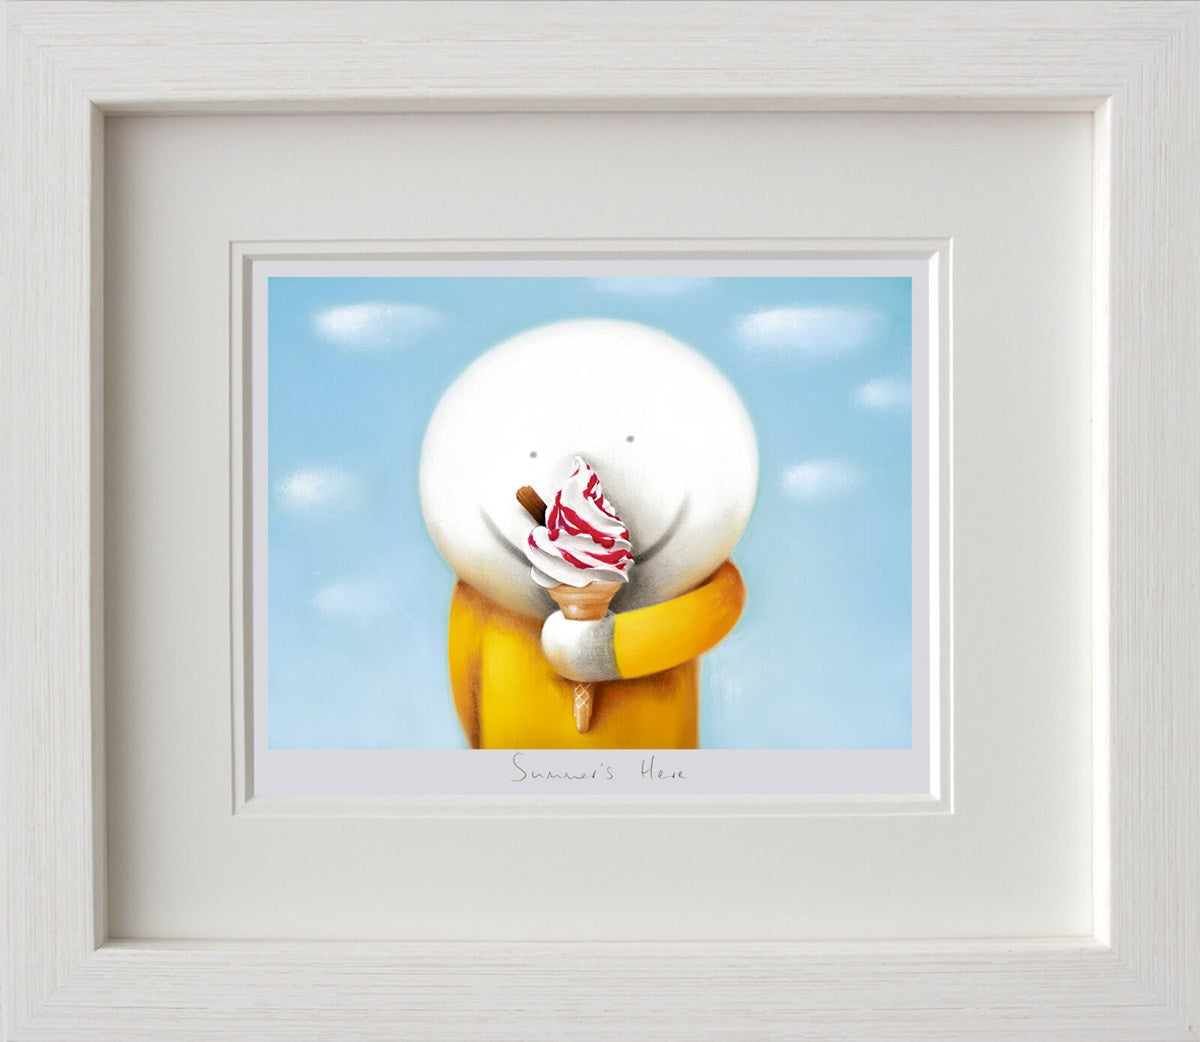 Summer's Here limited edition framed print by Doug Hyde